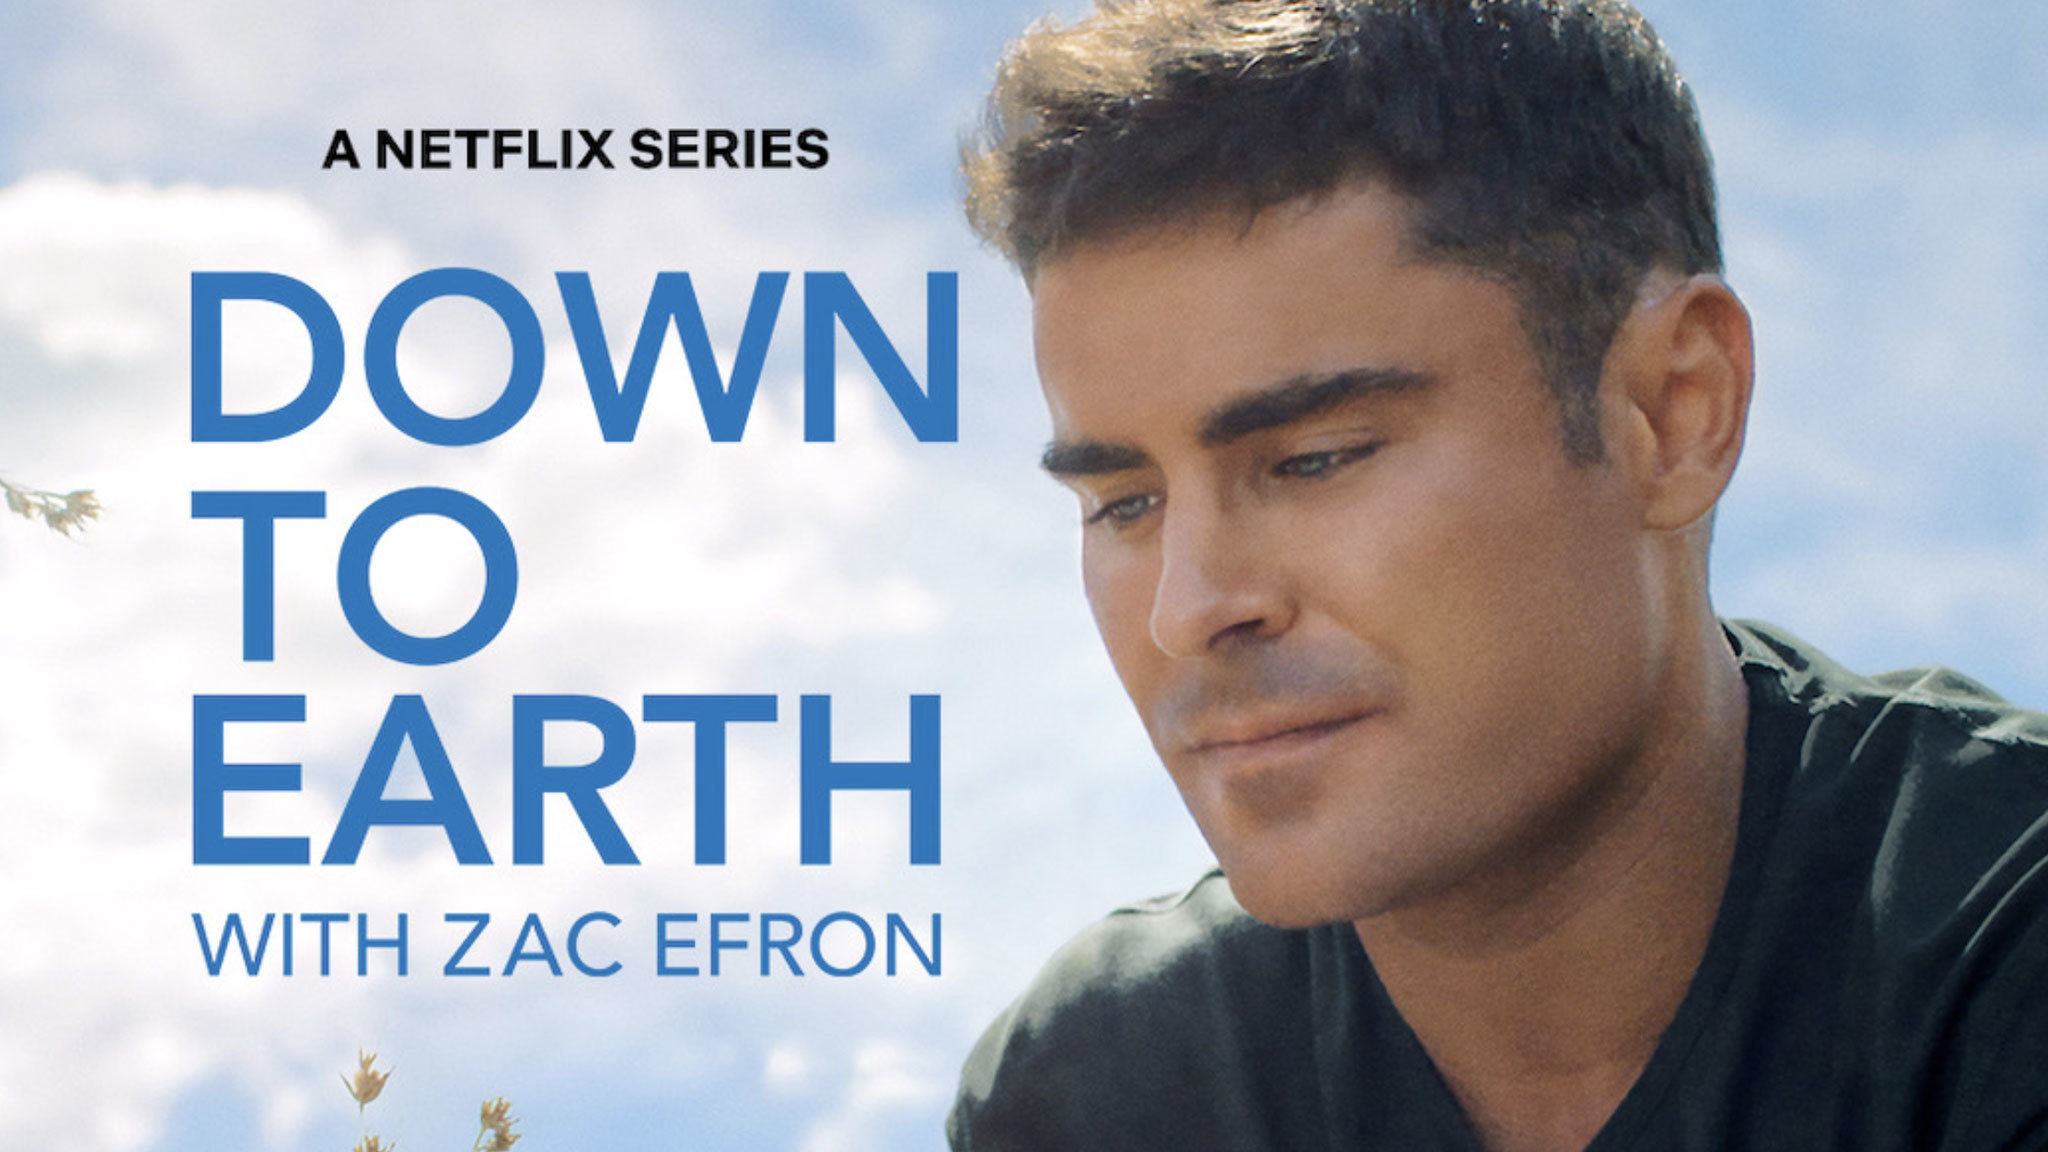 Down to Earth with Zac Efron - Wikipedia